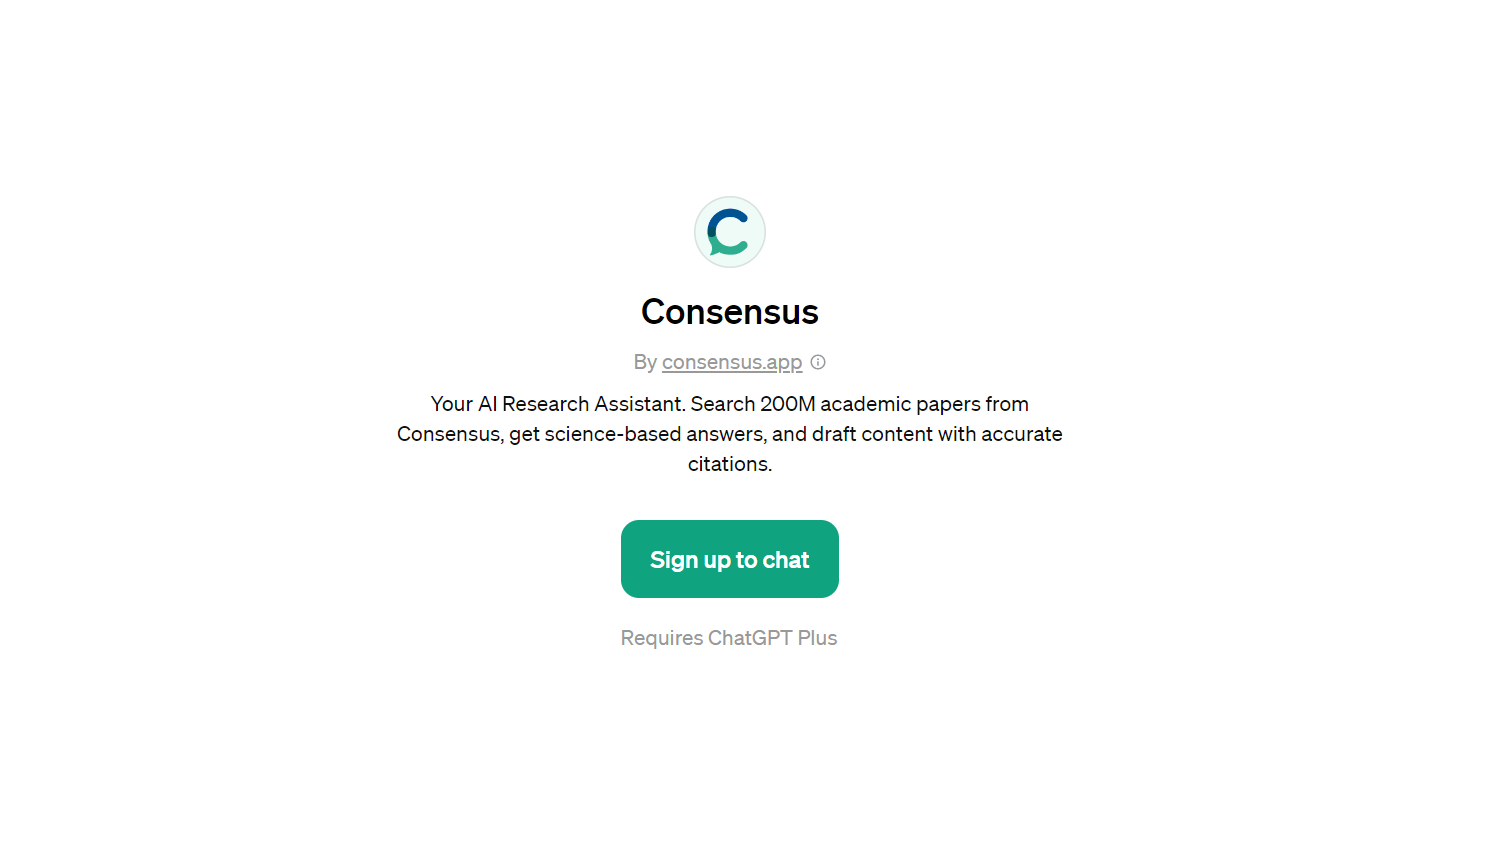 Consensus - AI Research Assistant